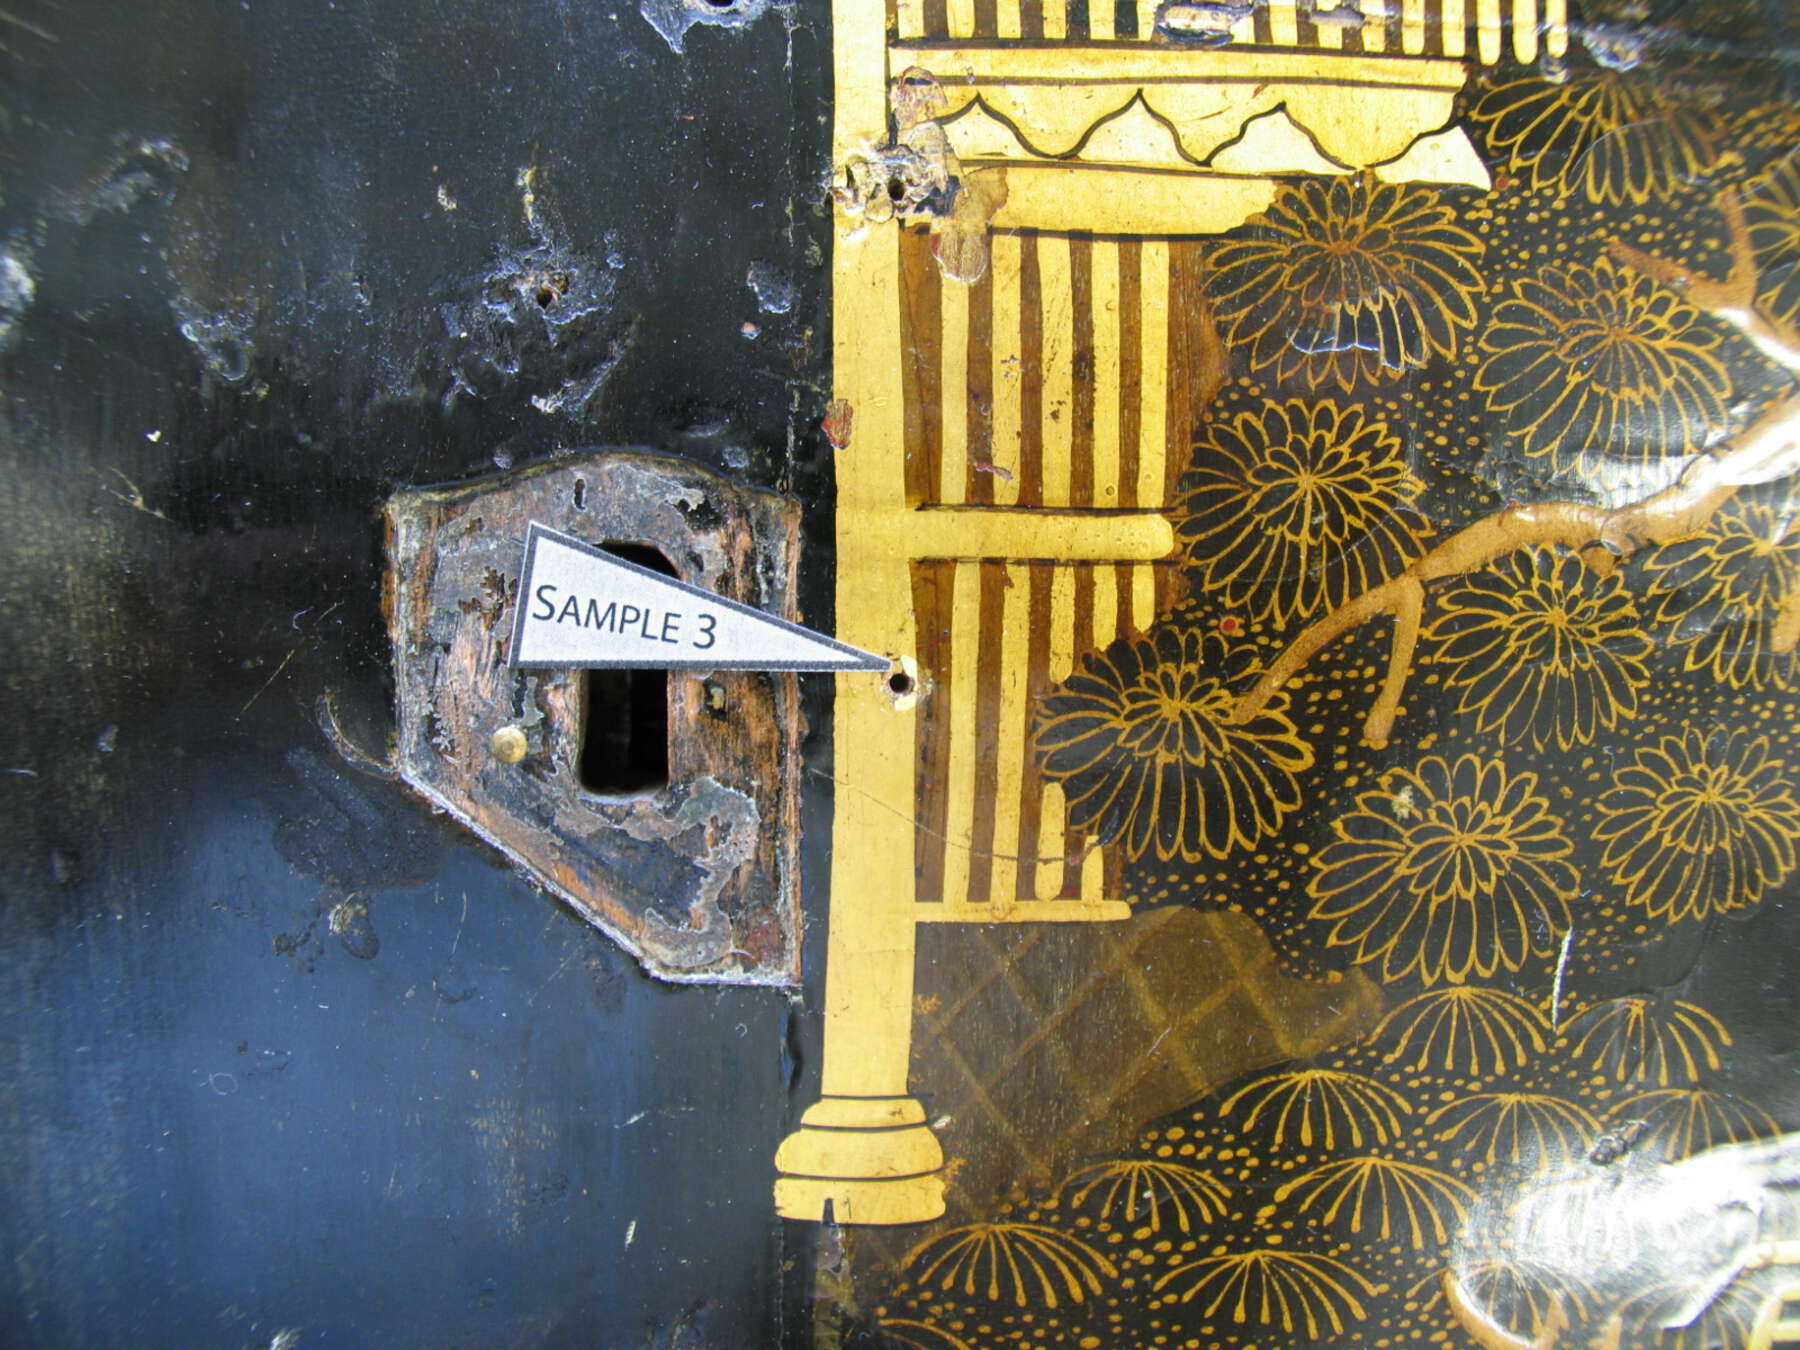 detail of one of the lacquer scenes, with a white triangle with black text reading “sample 3” pointing to a hole in one of the pagoda columns where a sample was taken